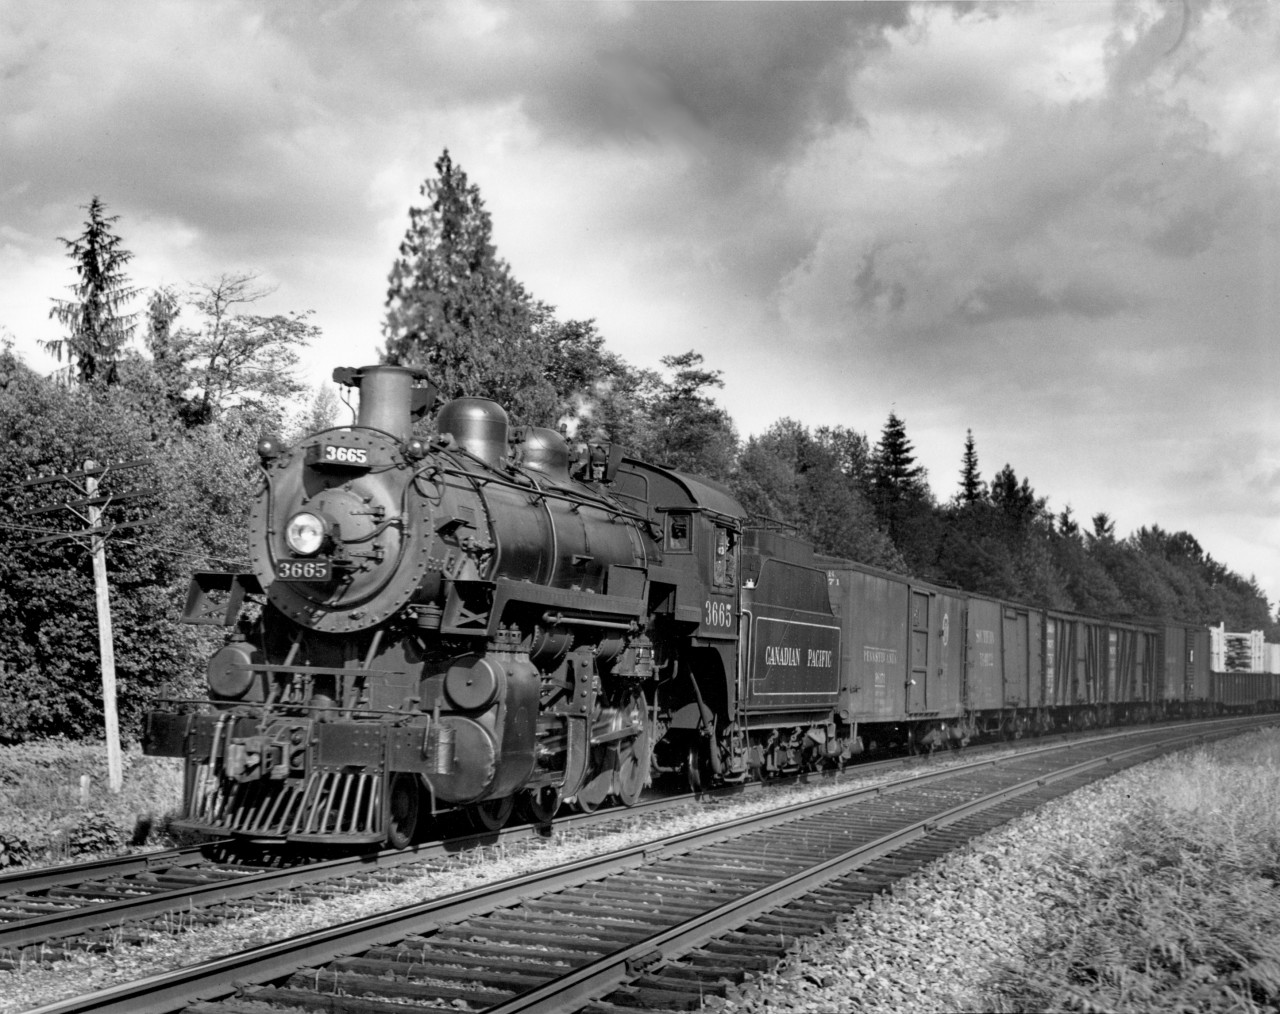 CP train 809 with engine 3665 in Fraser Valley.  Not sure of exact location.